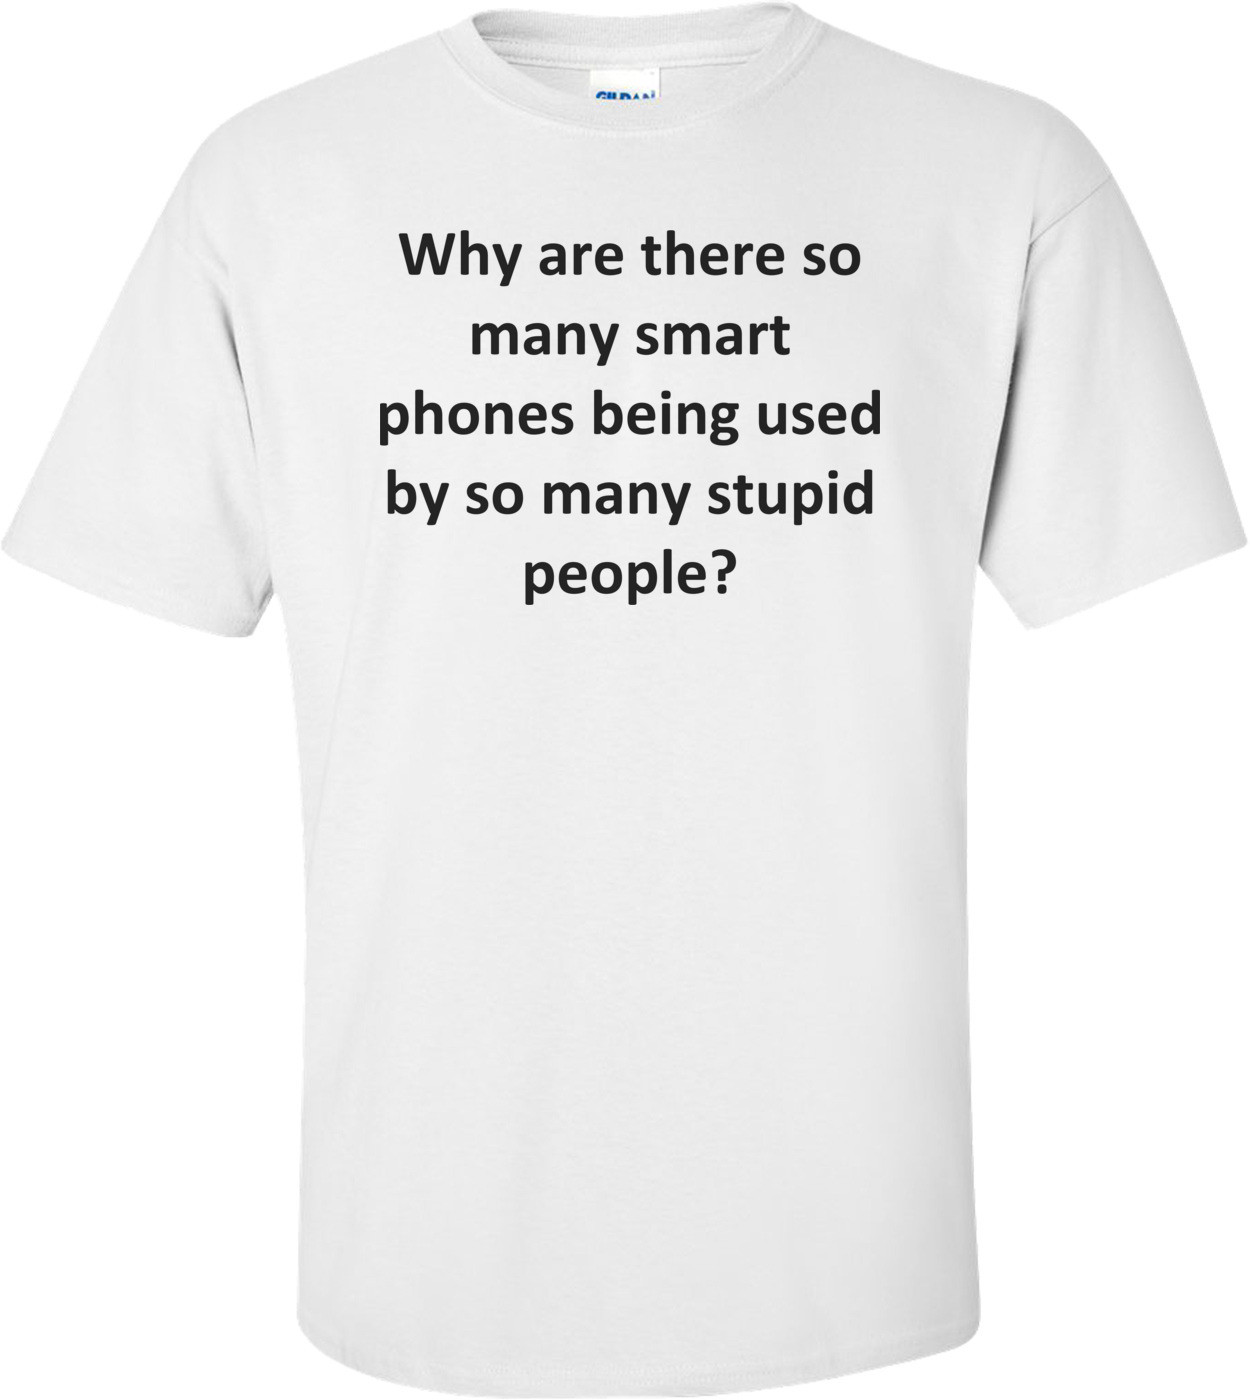 Why are there so many smart phones being used by so many stupid people? Shirt